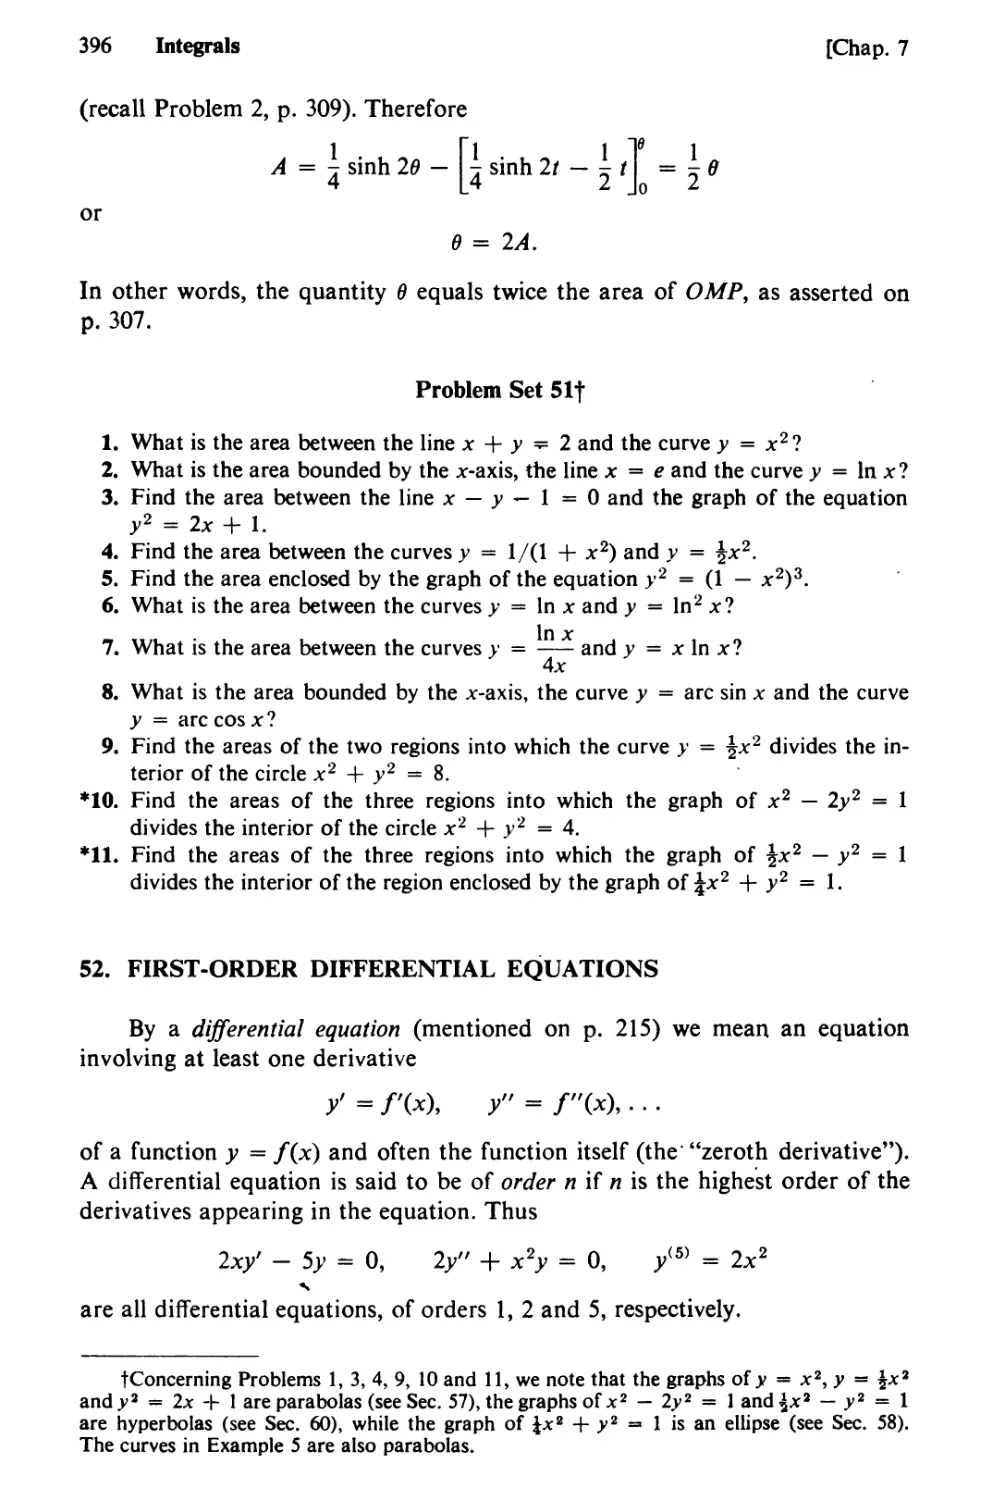 52. First-Order Differential Equations